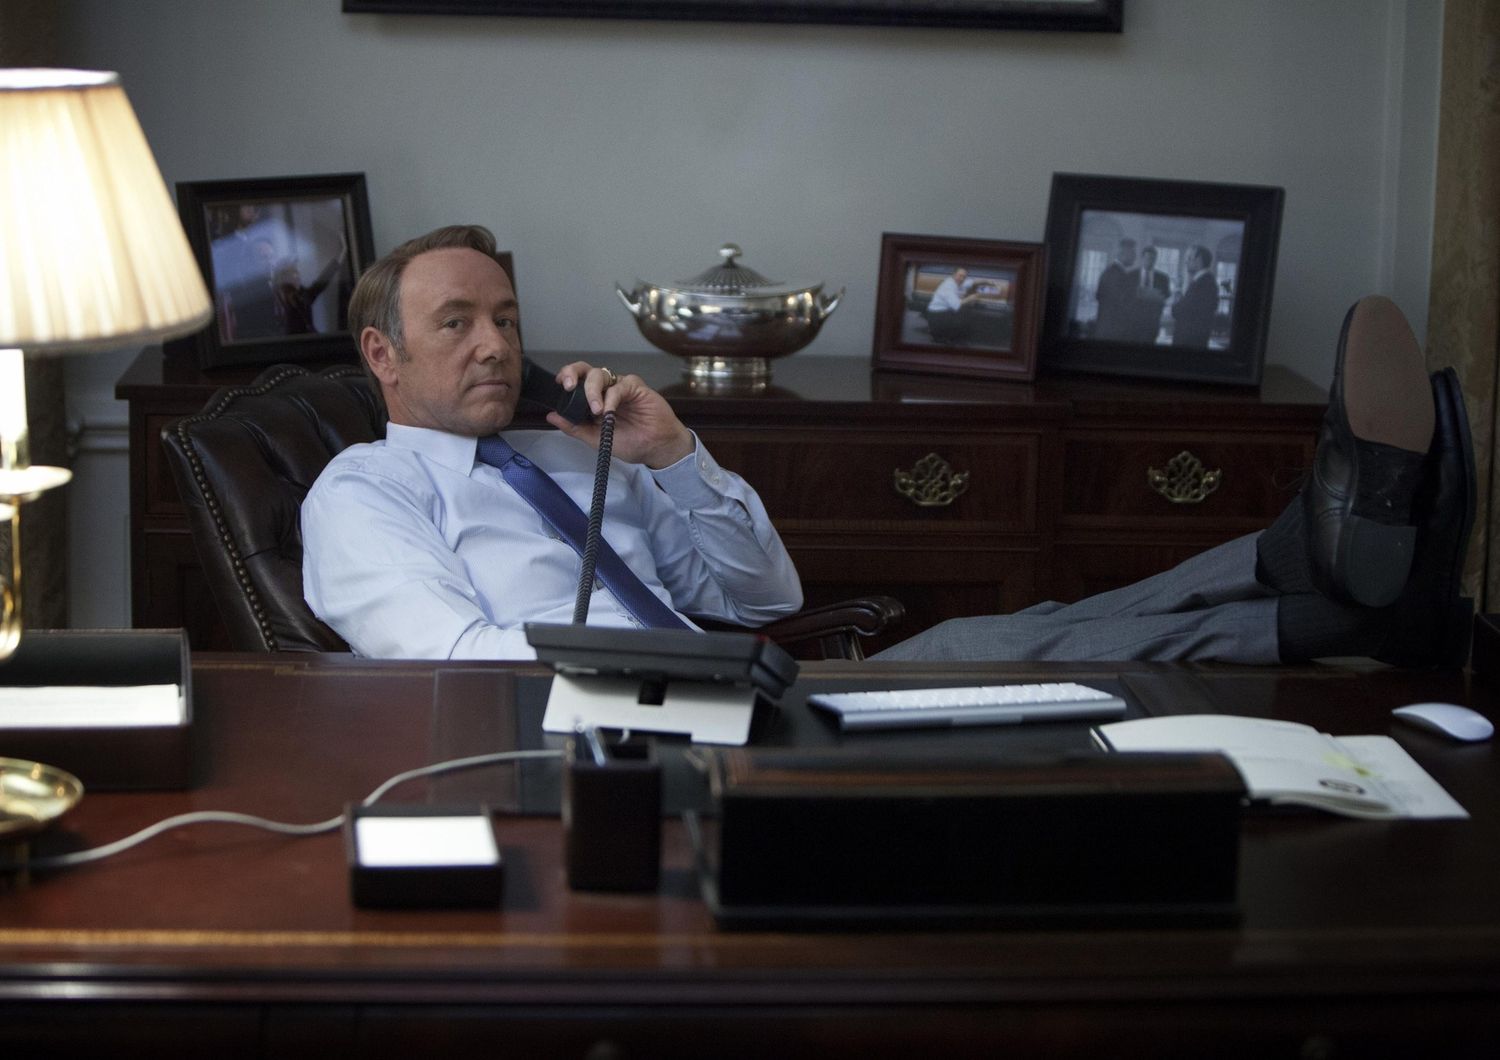 Kevin Spacey nel ruolo di Frank Underwood